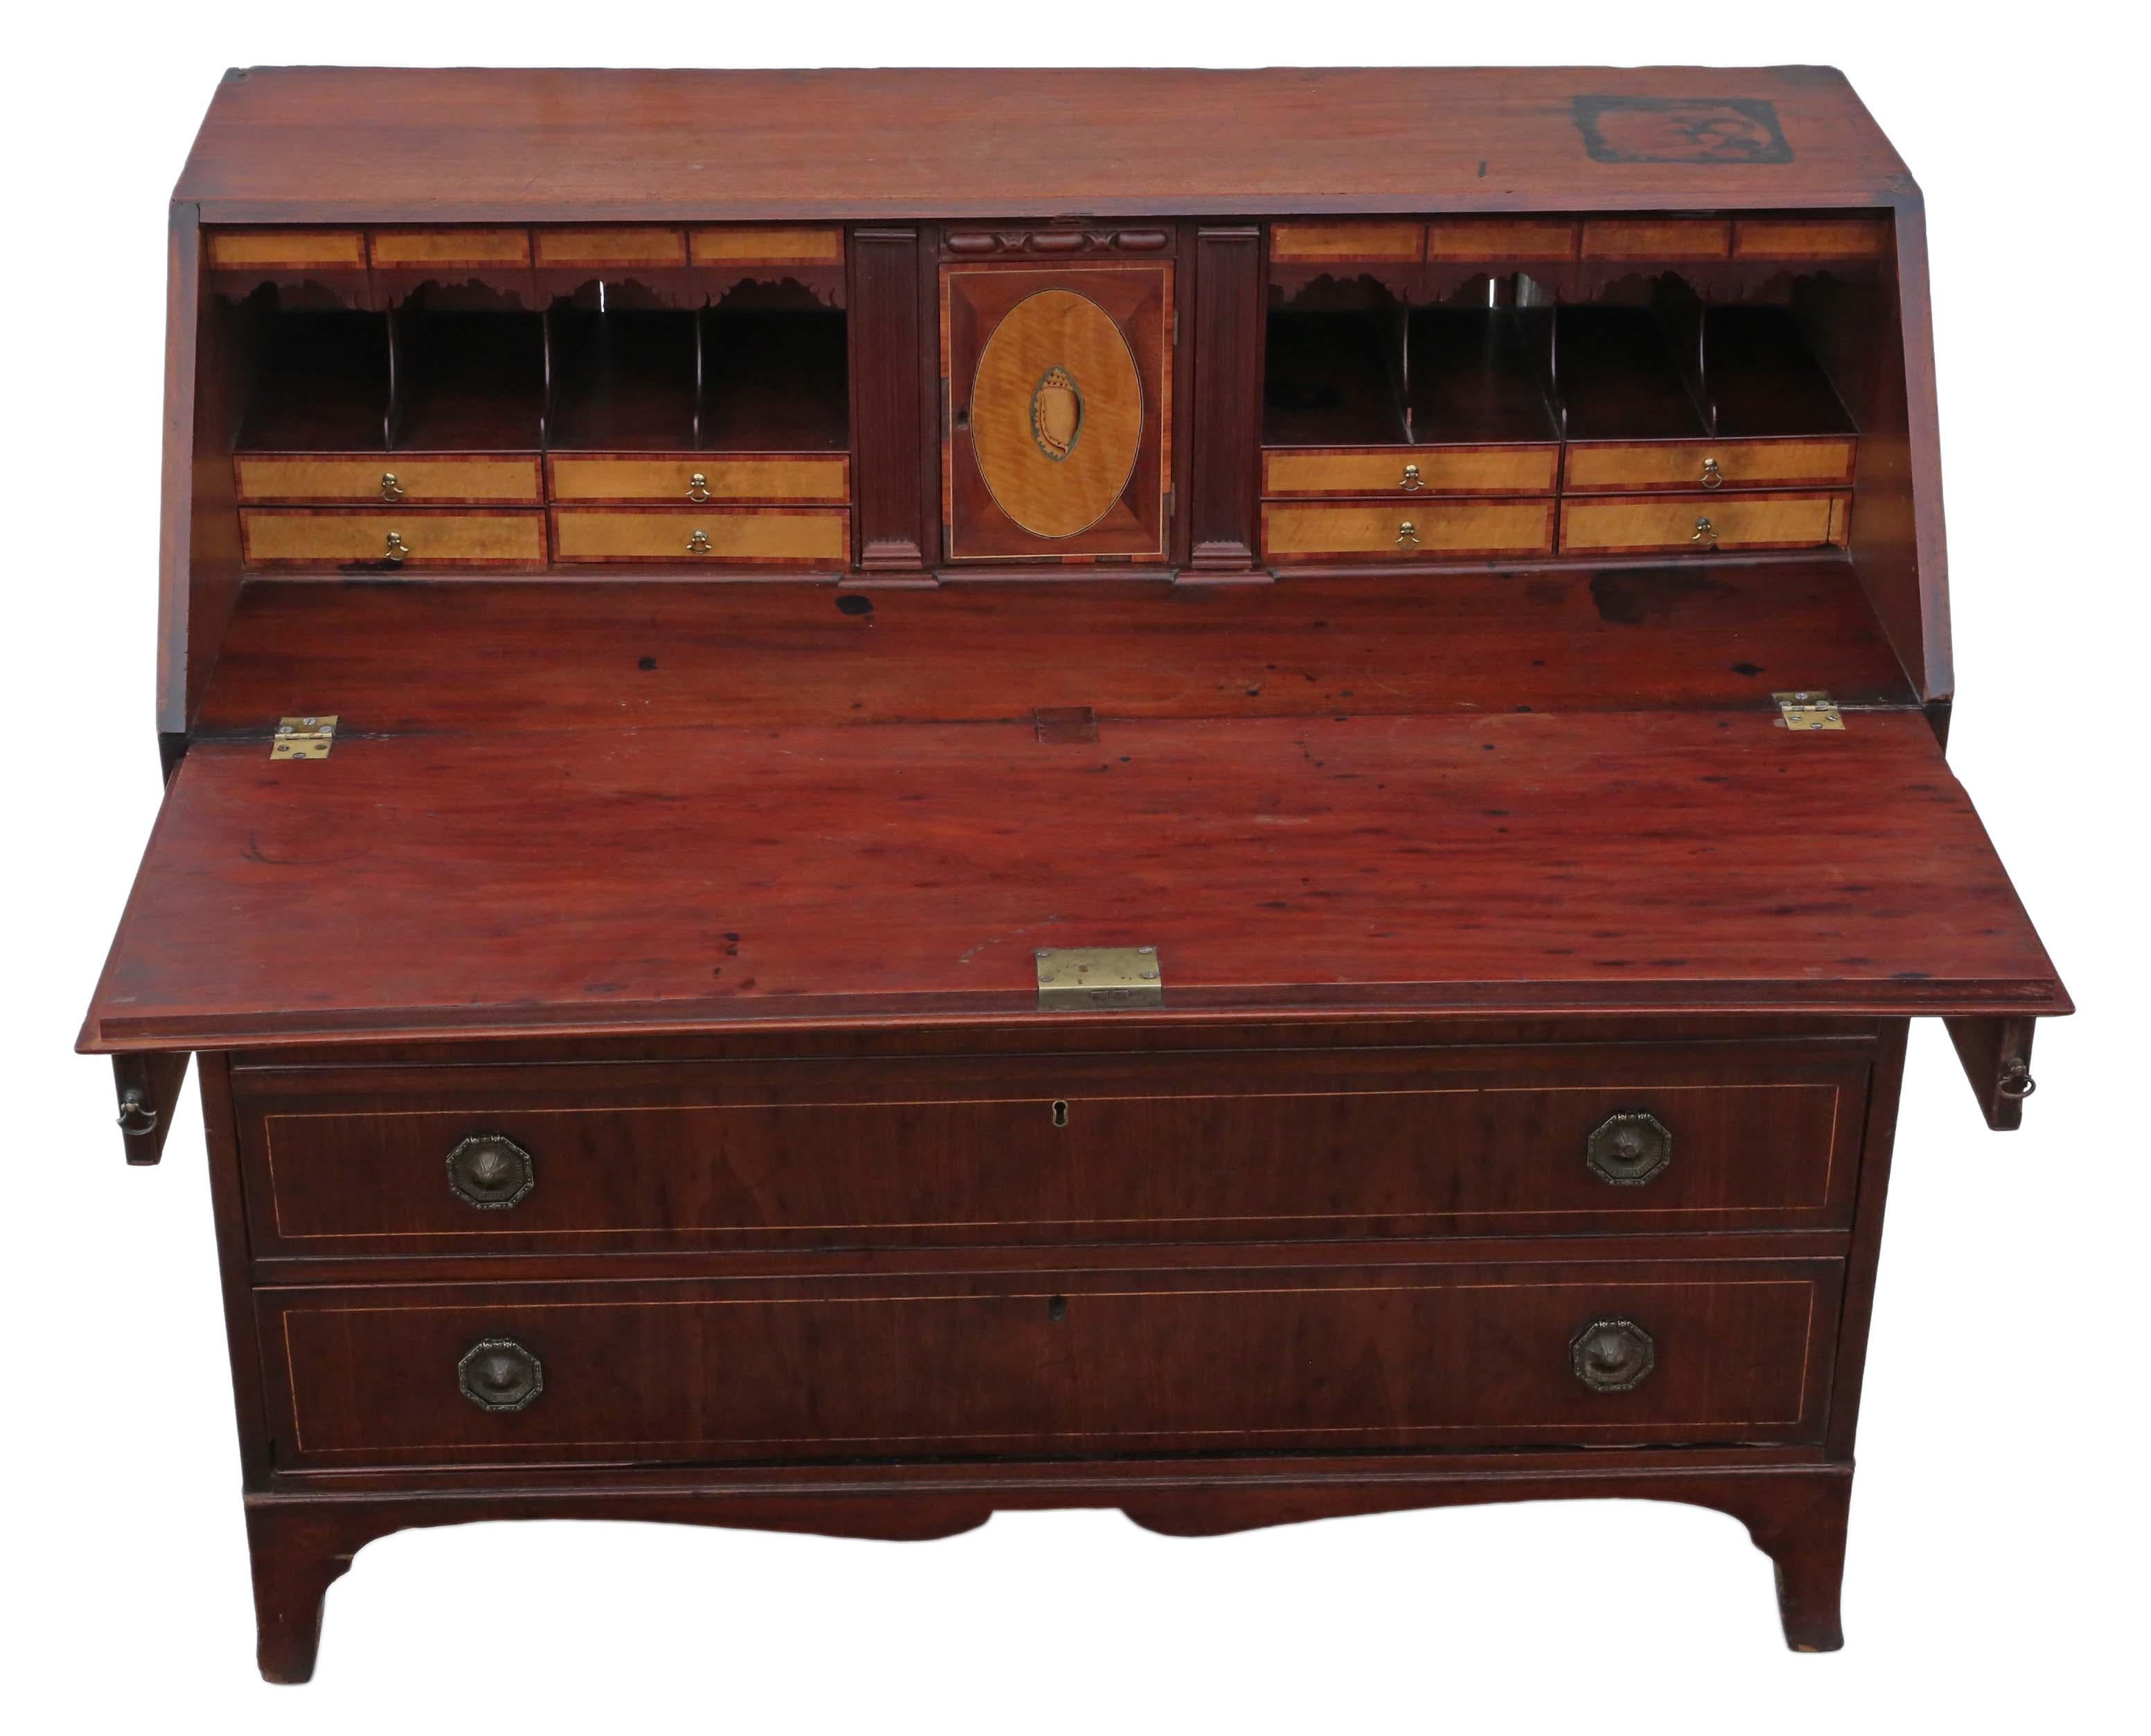 Antique large Georgian / Regency early 19th century mahogany bureau desk writing table.

This is a lovely bureau, that is full of age, charm and character. Fantastic crossbanded maple interior, this is a high spec bureau.

No loose joints and